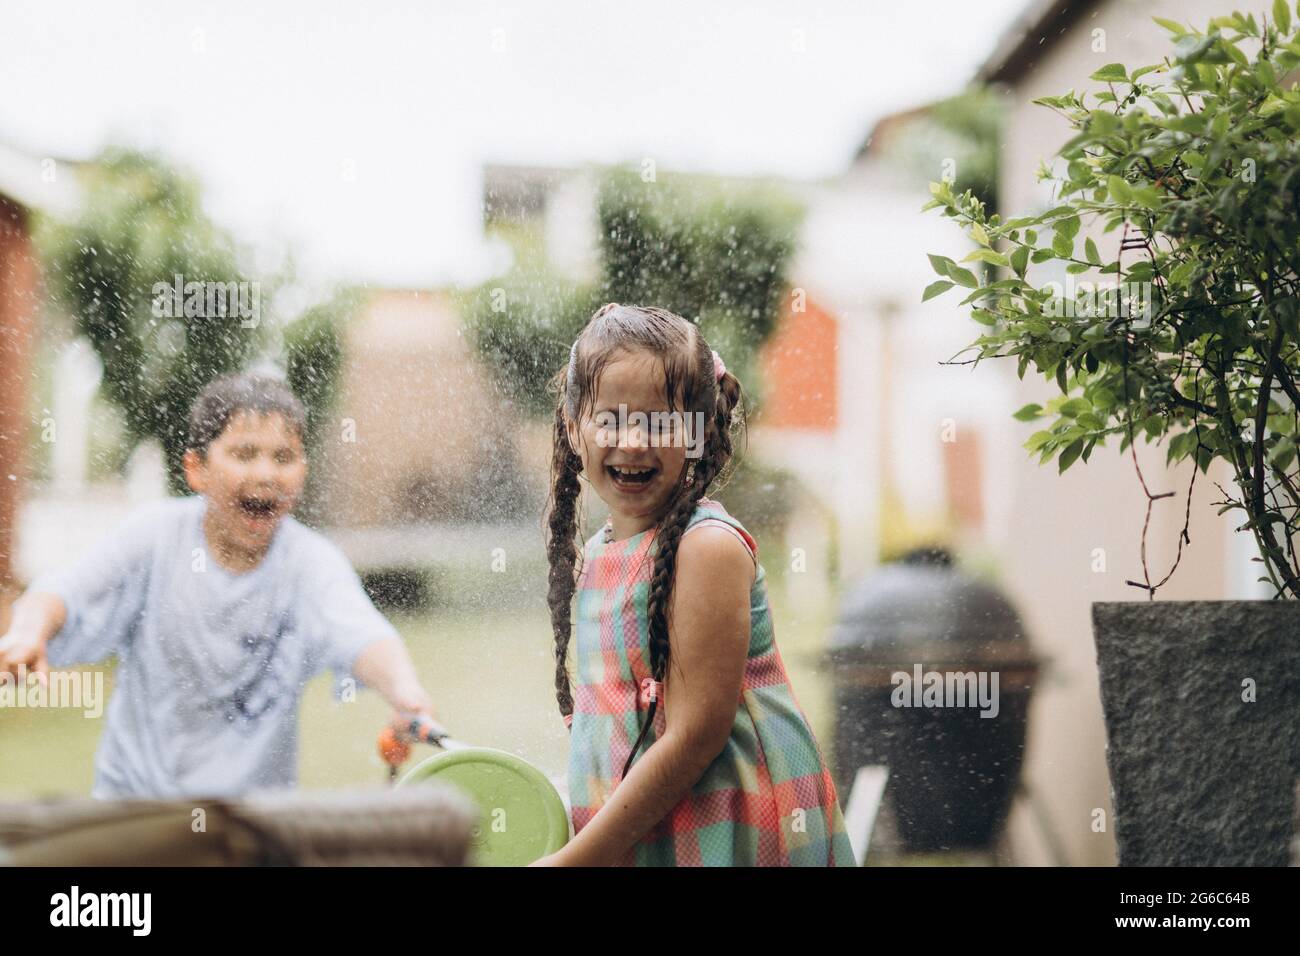 Summer games with water hose in the garden. Stock Photo